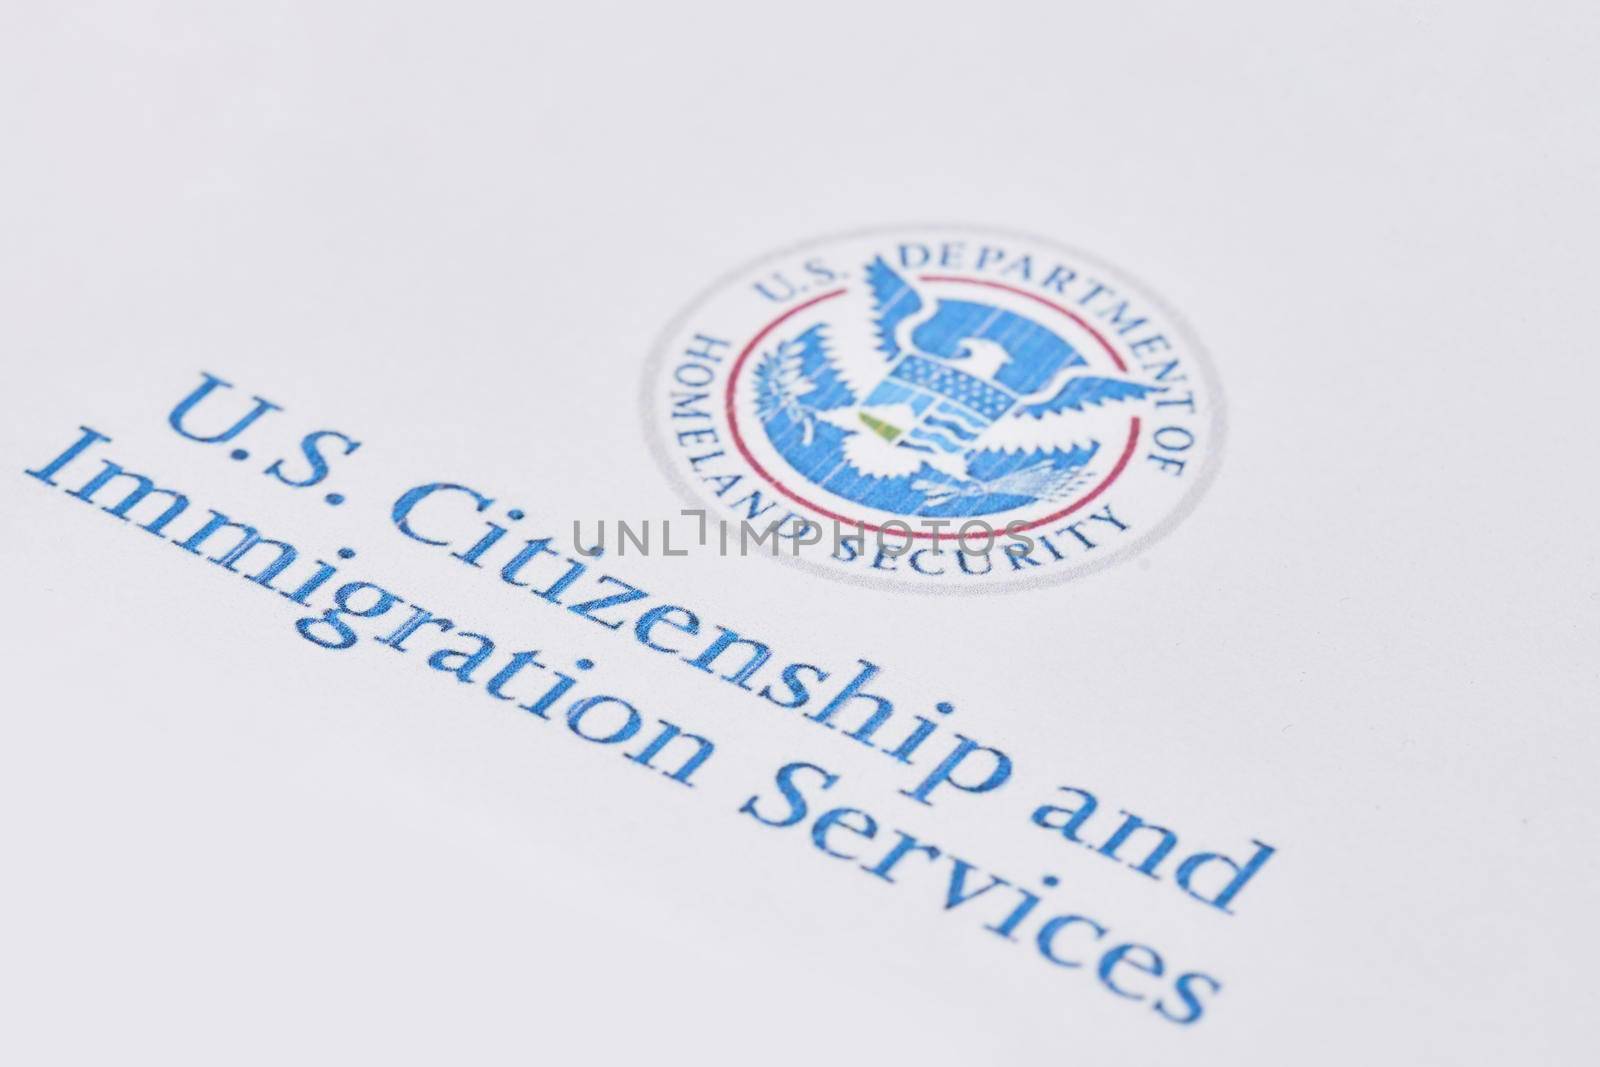 U.S. Citizenship and Immigration Services by golibtolibov